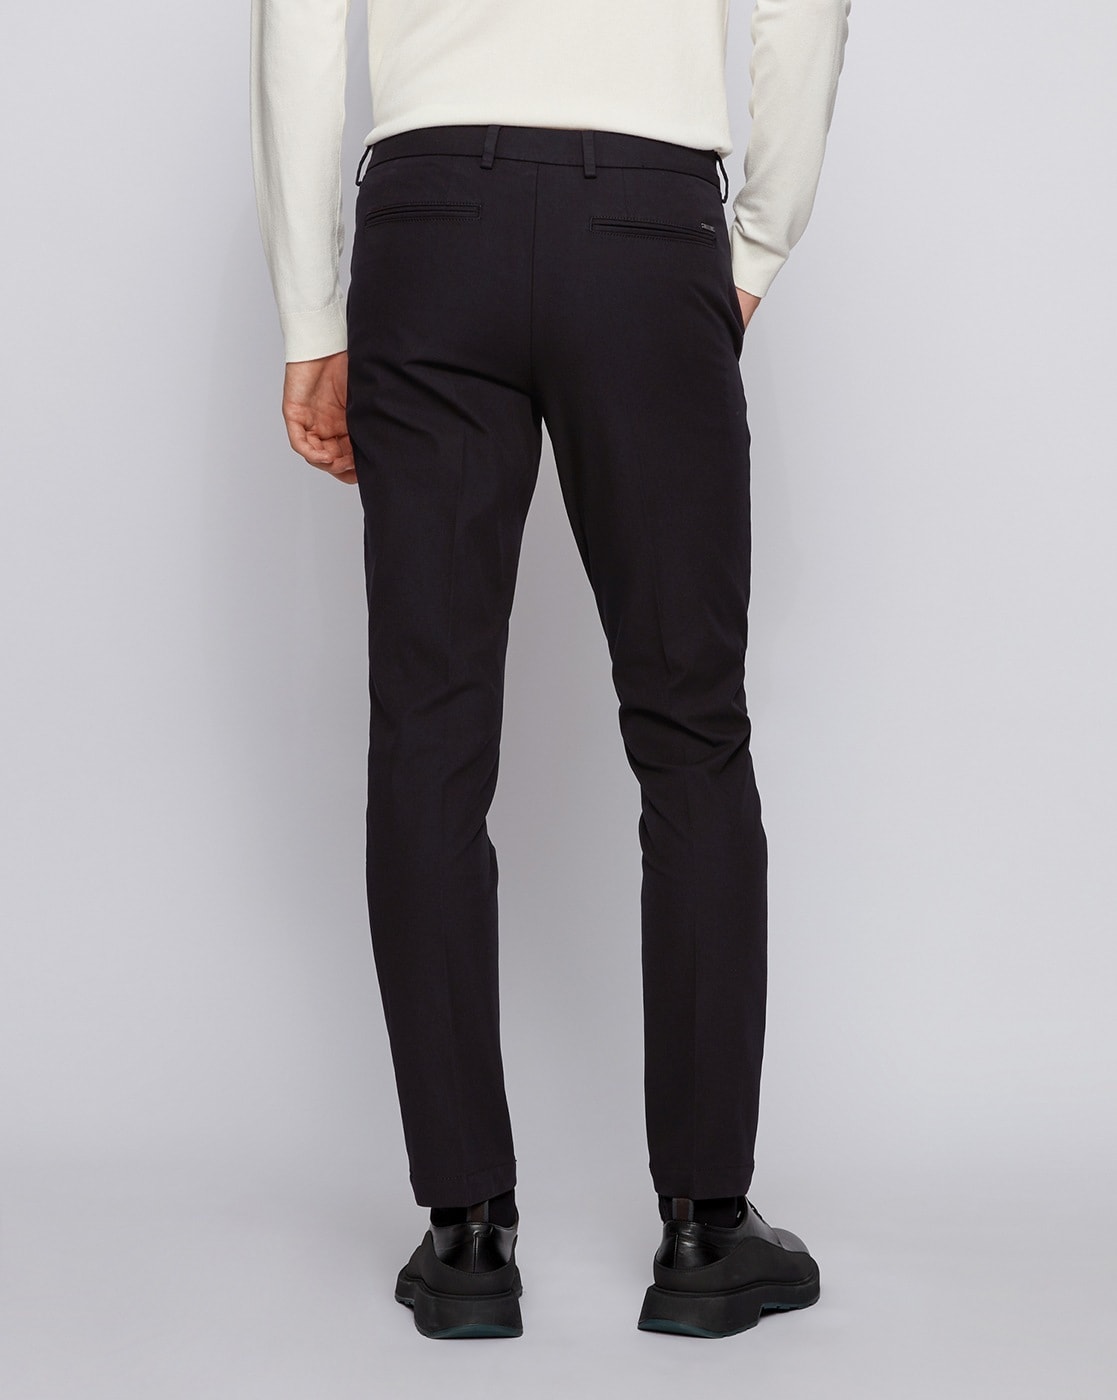 BOSS by HUGO BOSS Kaito Travel Slim Fit Pants in Black for Men  Lyst Canada